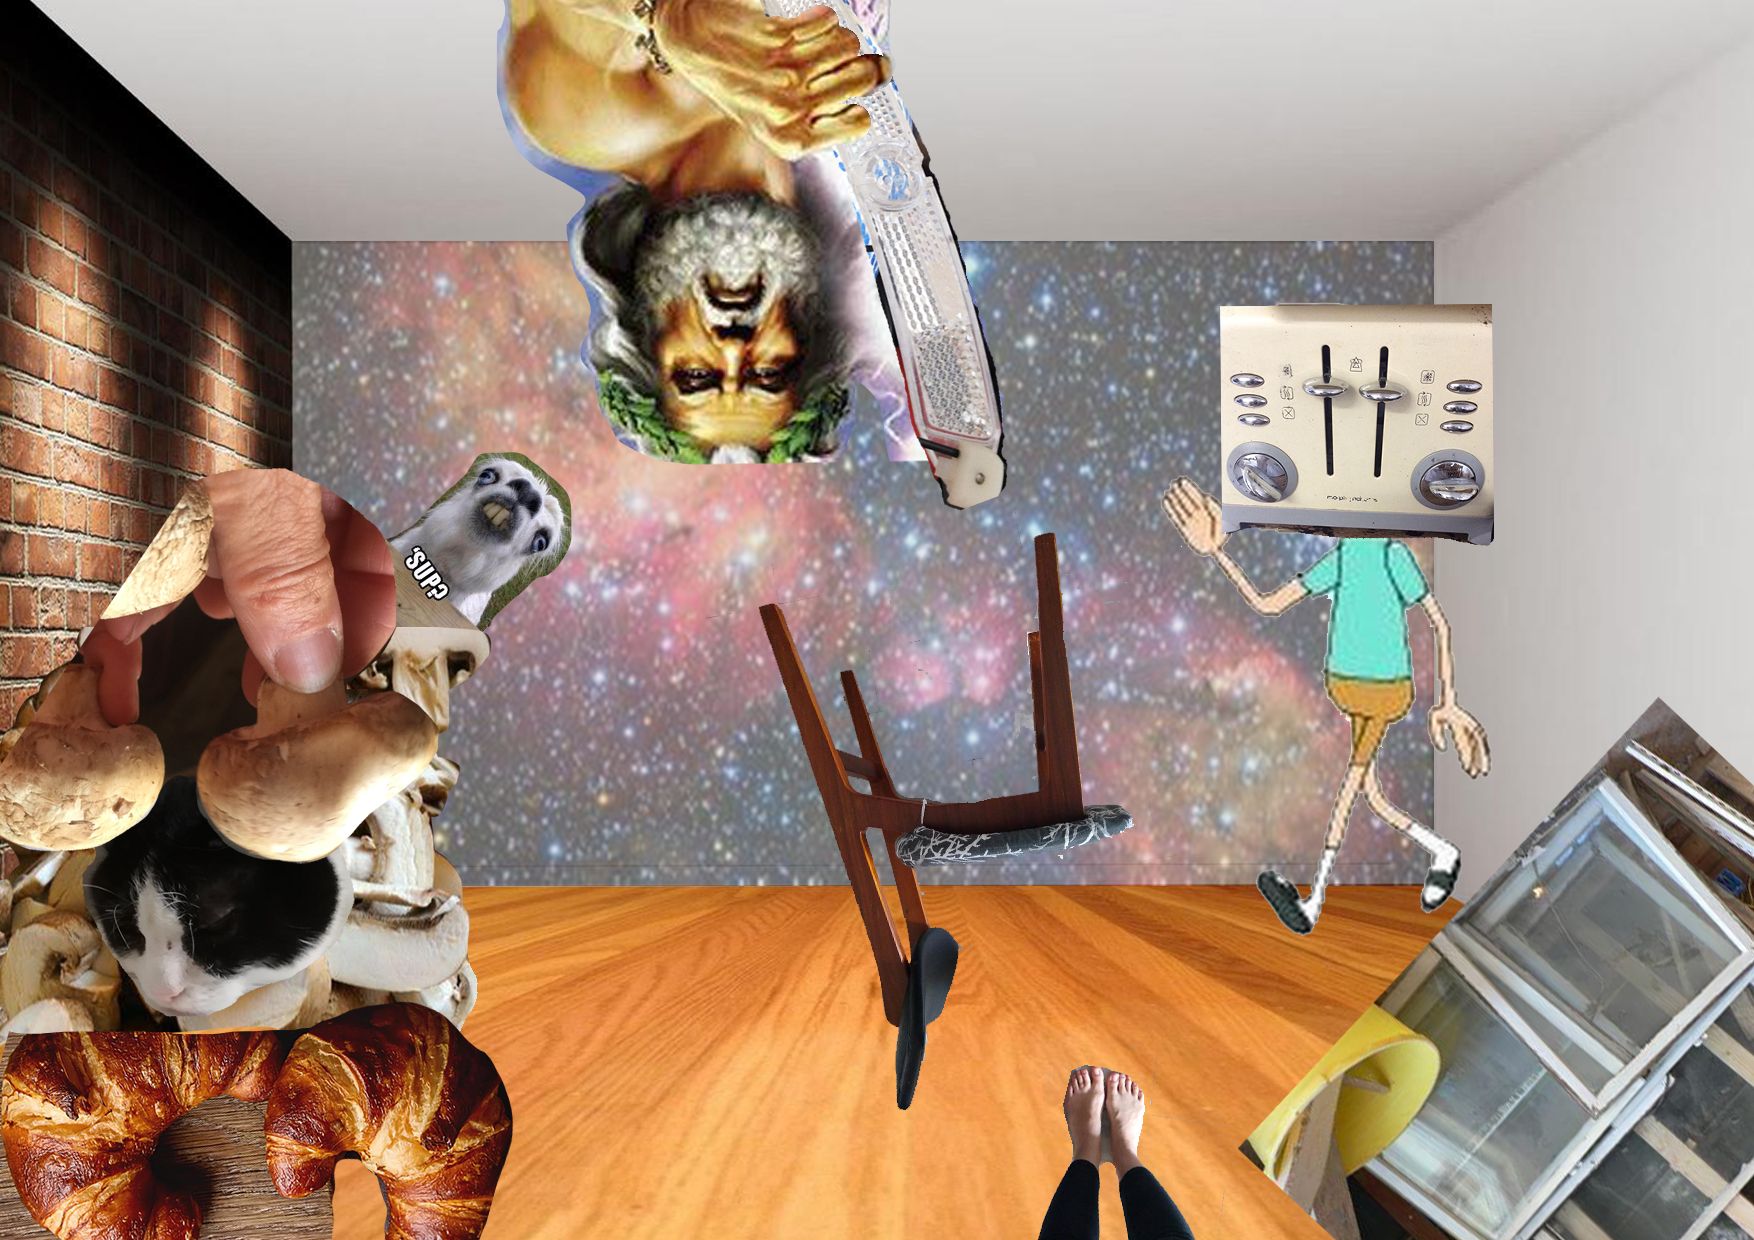 Collage showing a chair, some croissants, a cat, some mushrooms, some windows, Zeus, the drawing of a boy with a toaster instead of his head